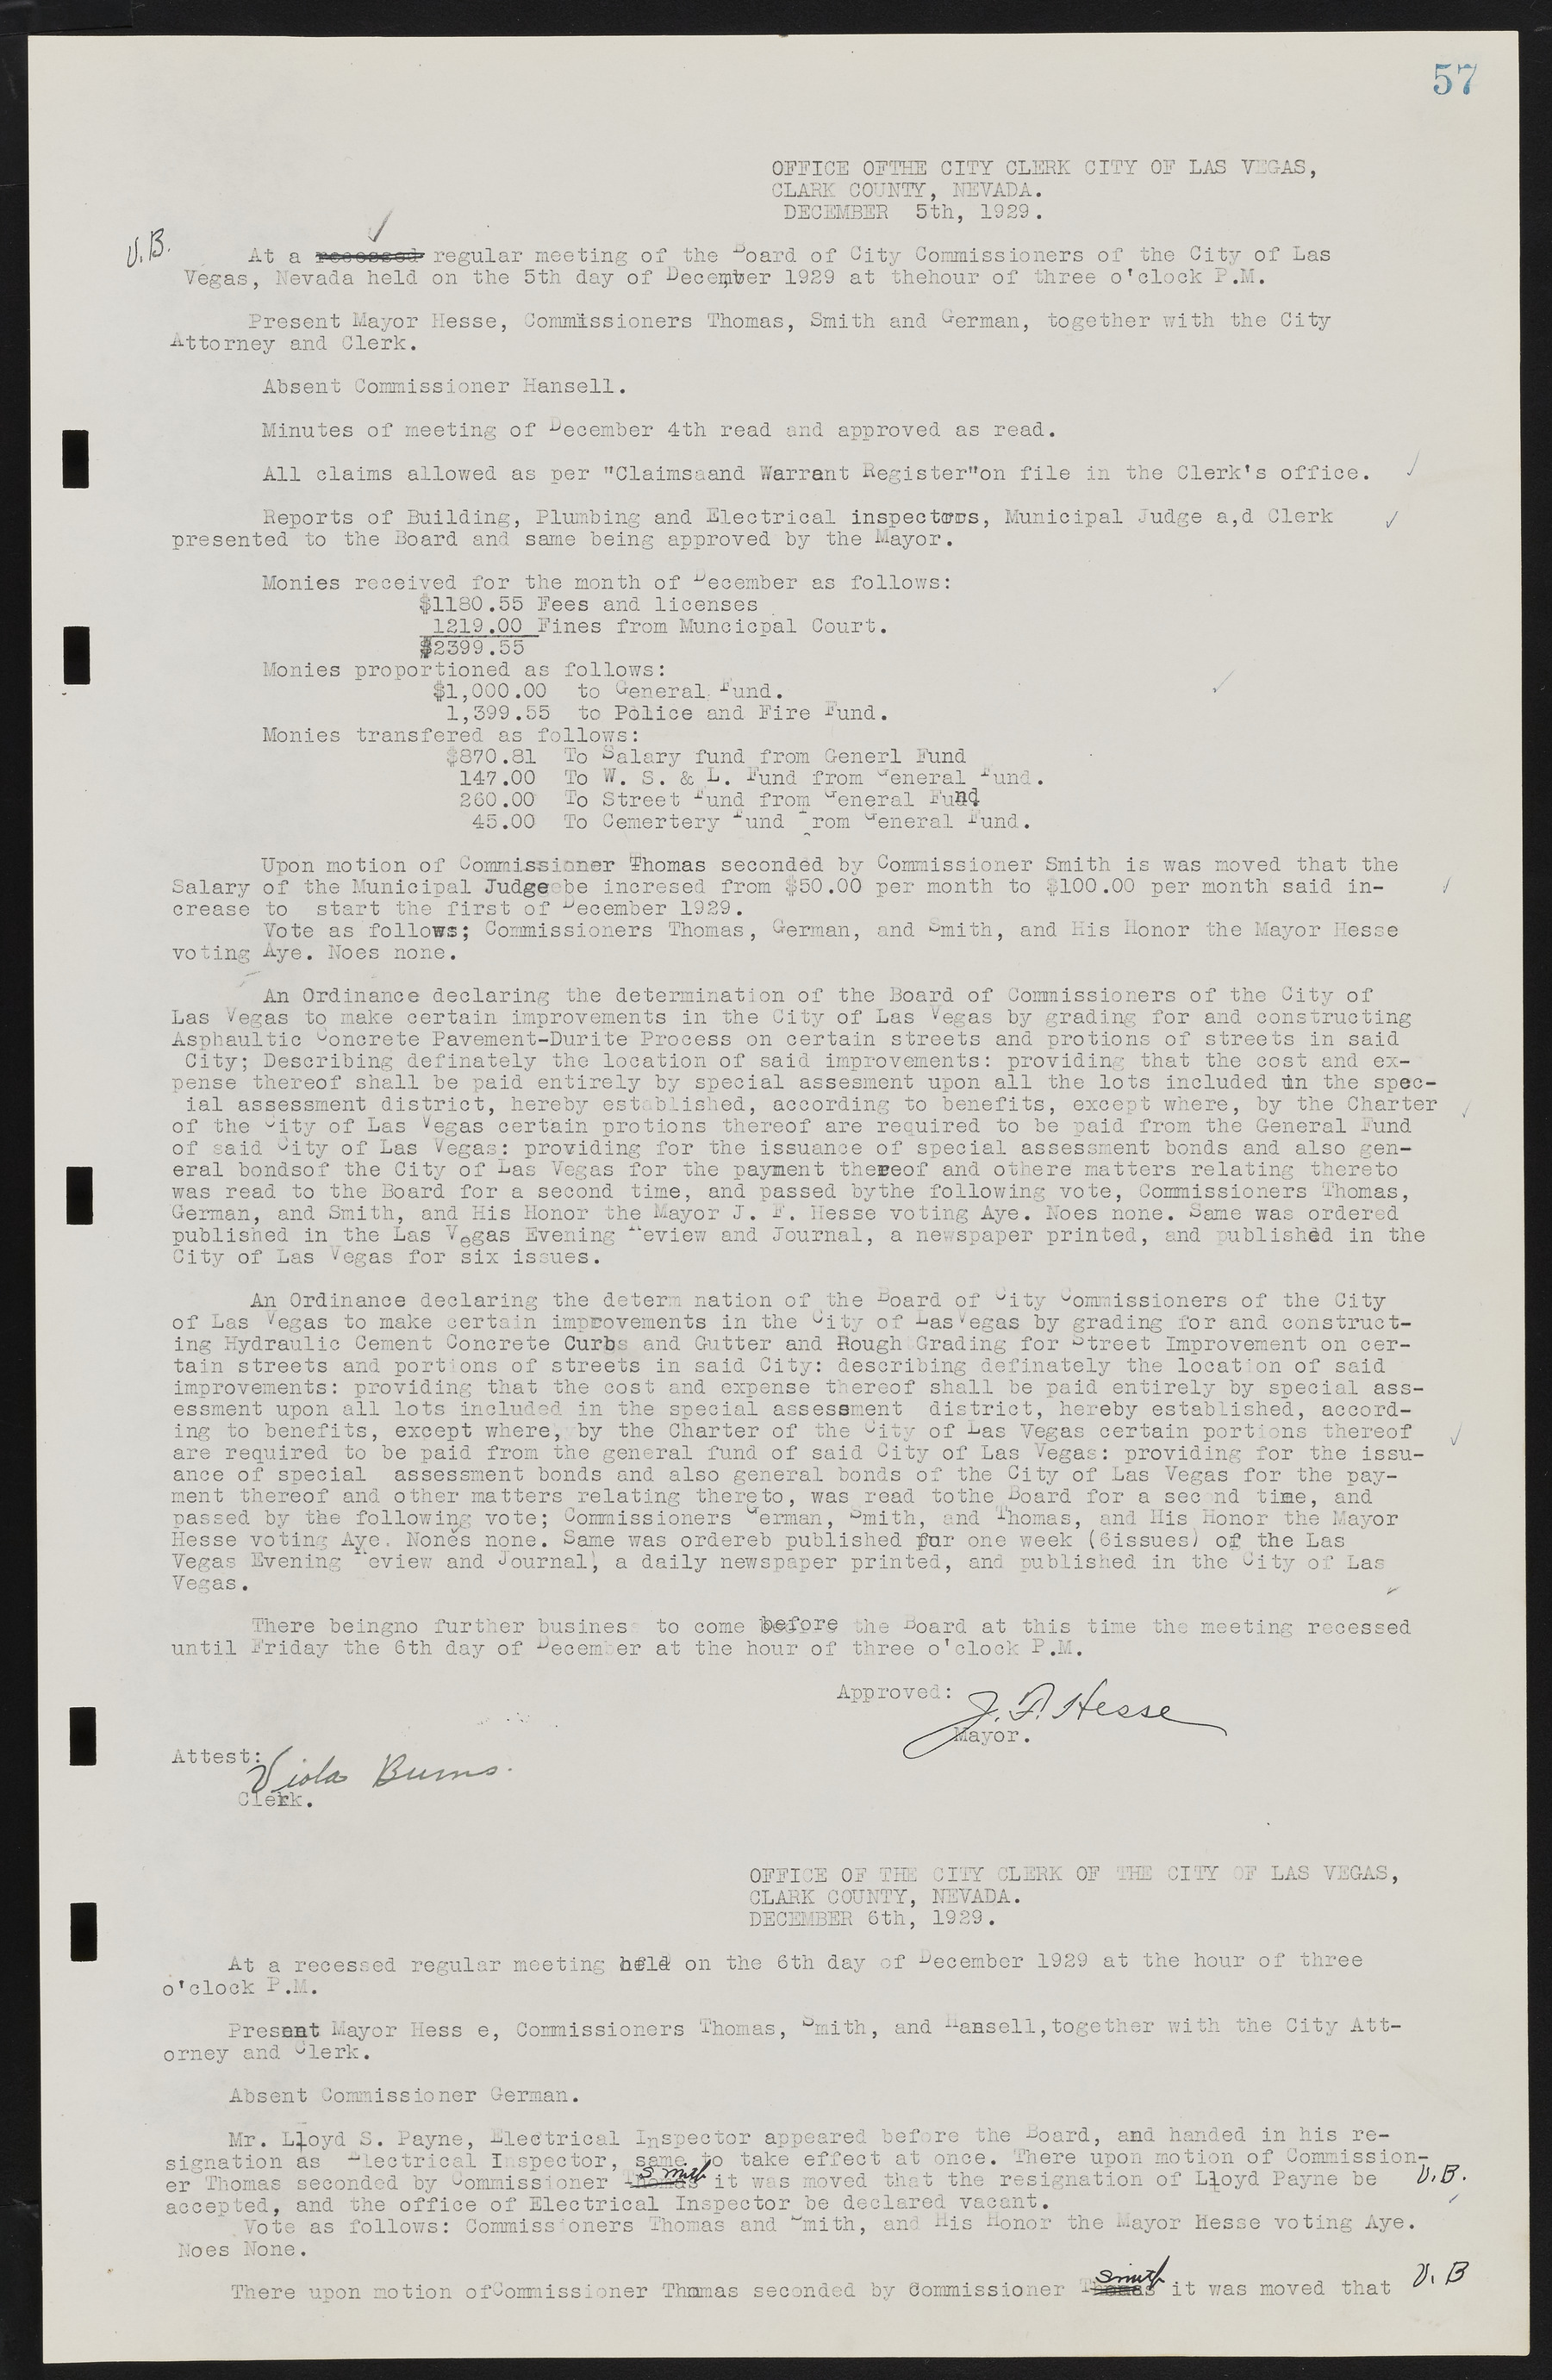 Las Vegas City Commission Minutes, May 14, 1929 to February 11, 1937, lvc000003-63